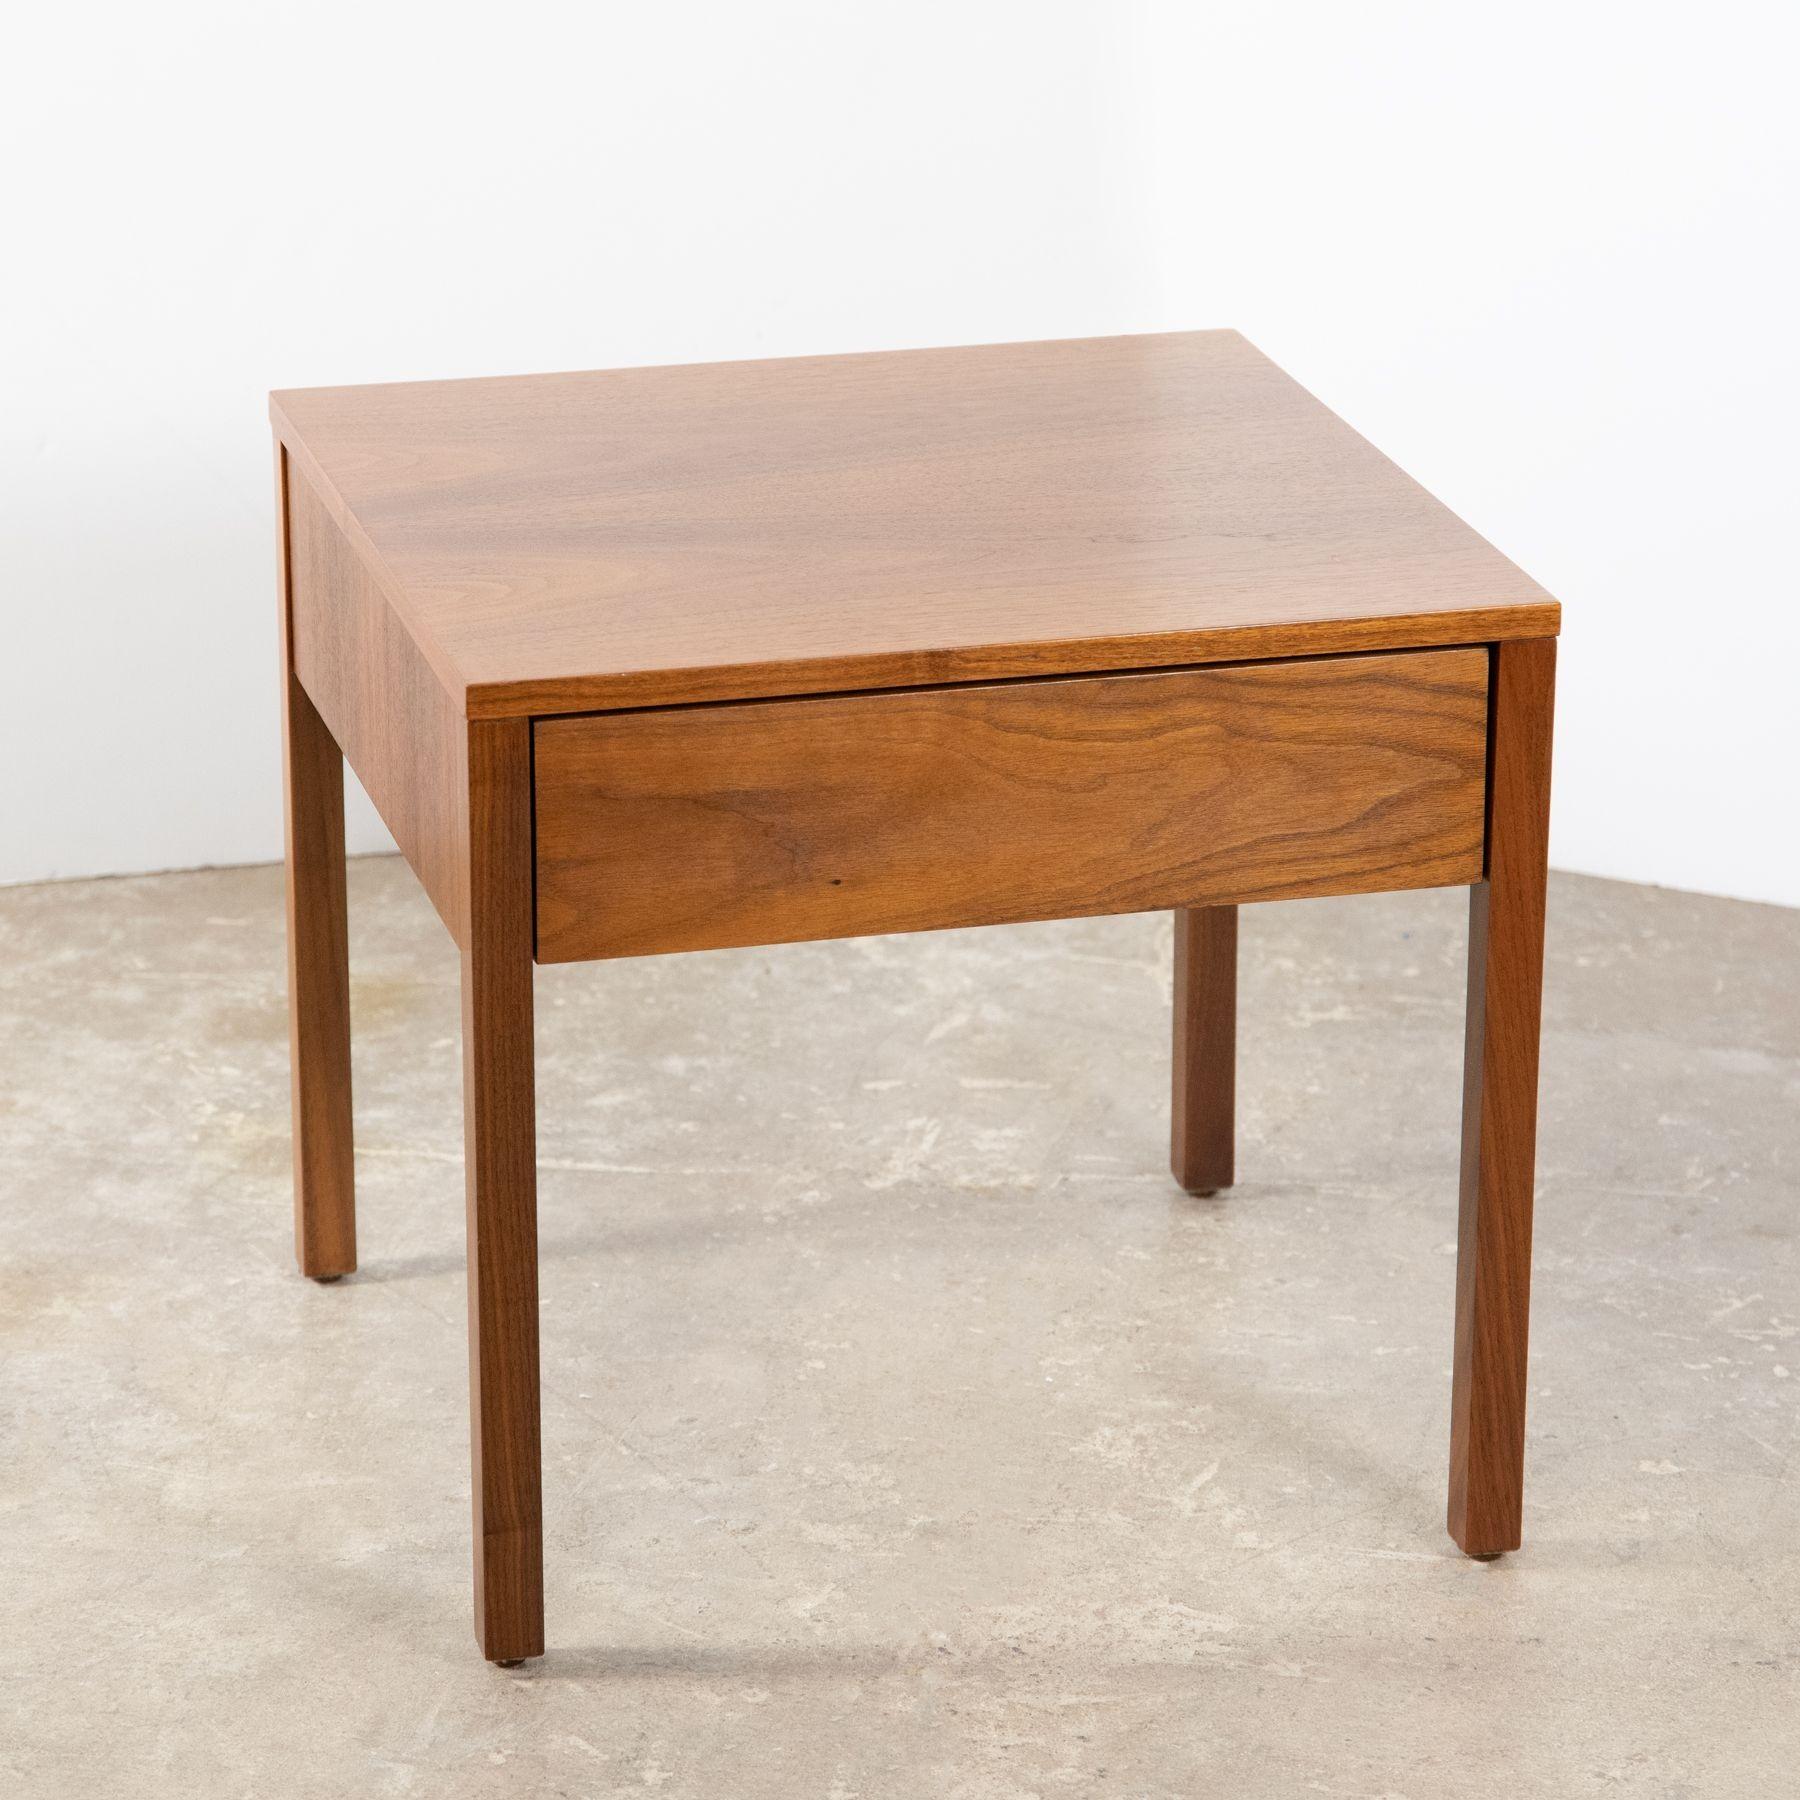 20th Century Florence Knoll Nightstands in Walnut for Knoll Associates Early Production For Sale